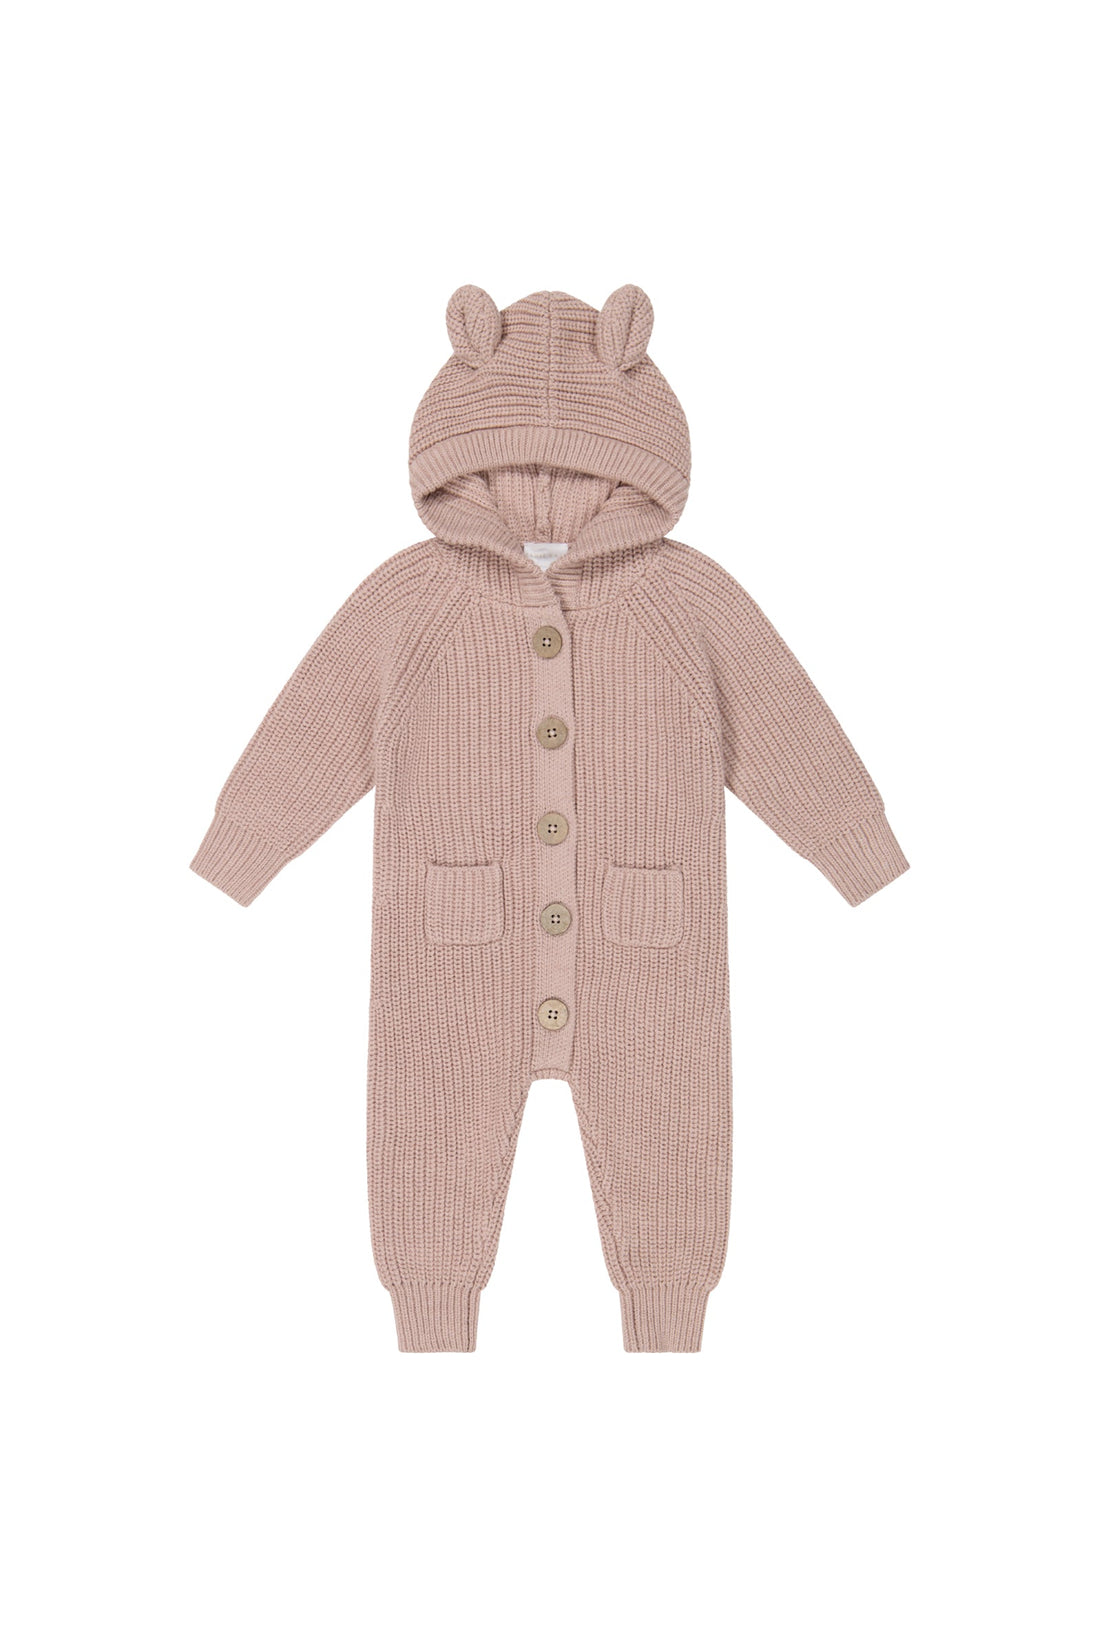 Marle - Luca Onepiece Kay Rose – Mahogany USA Jamie Knitted